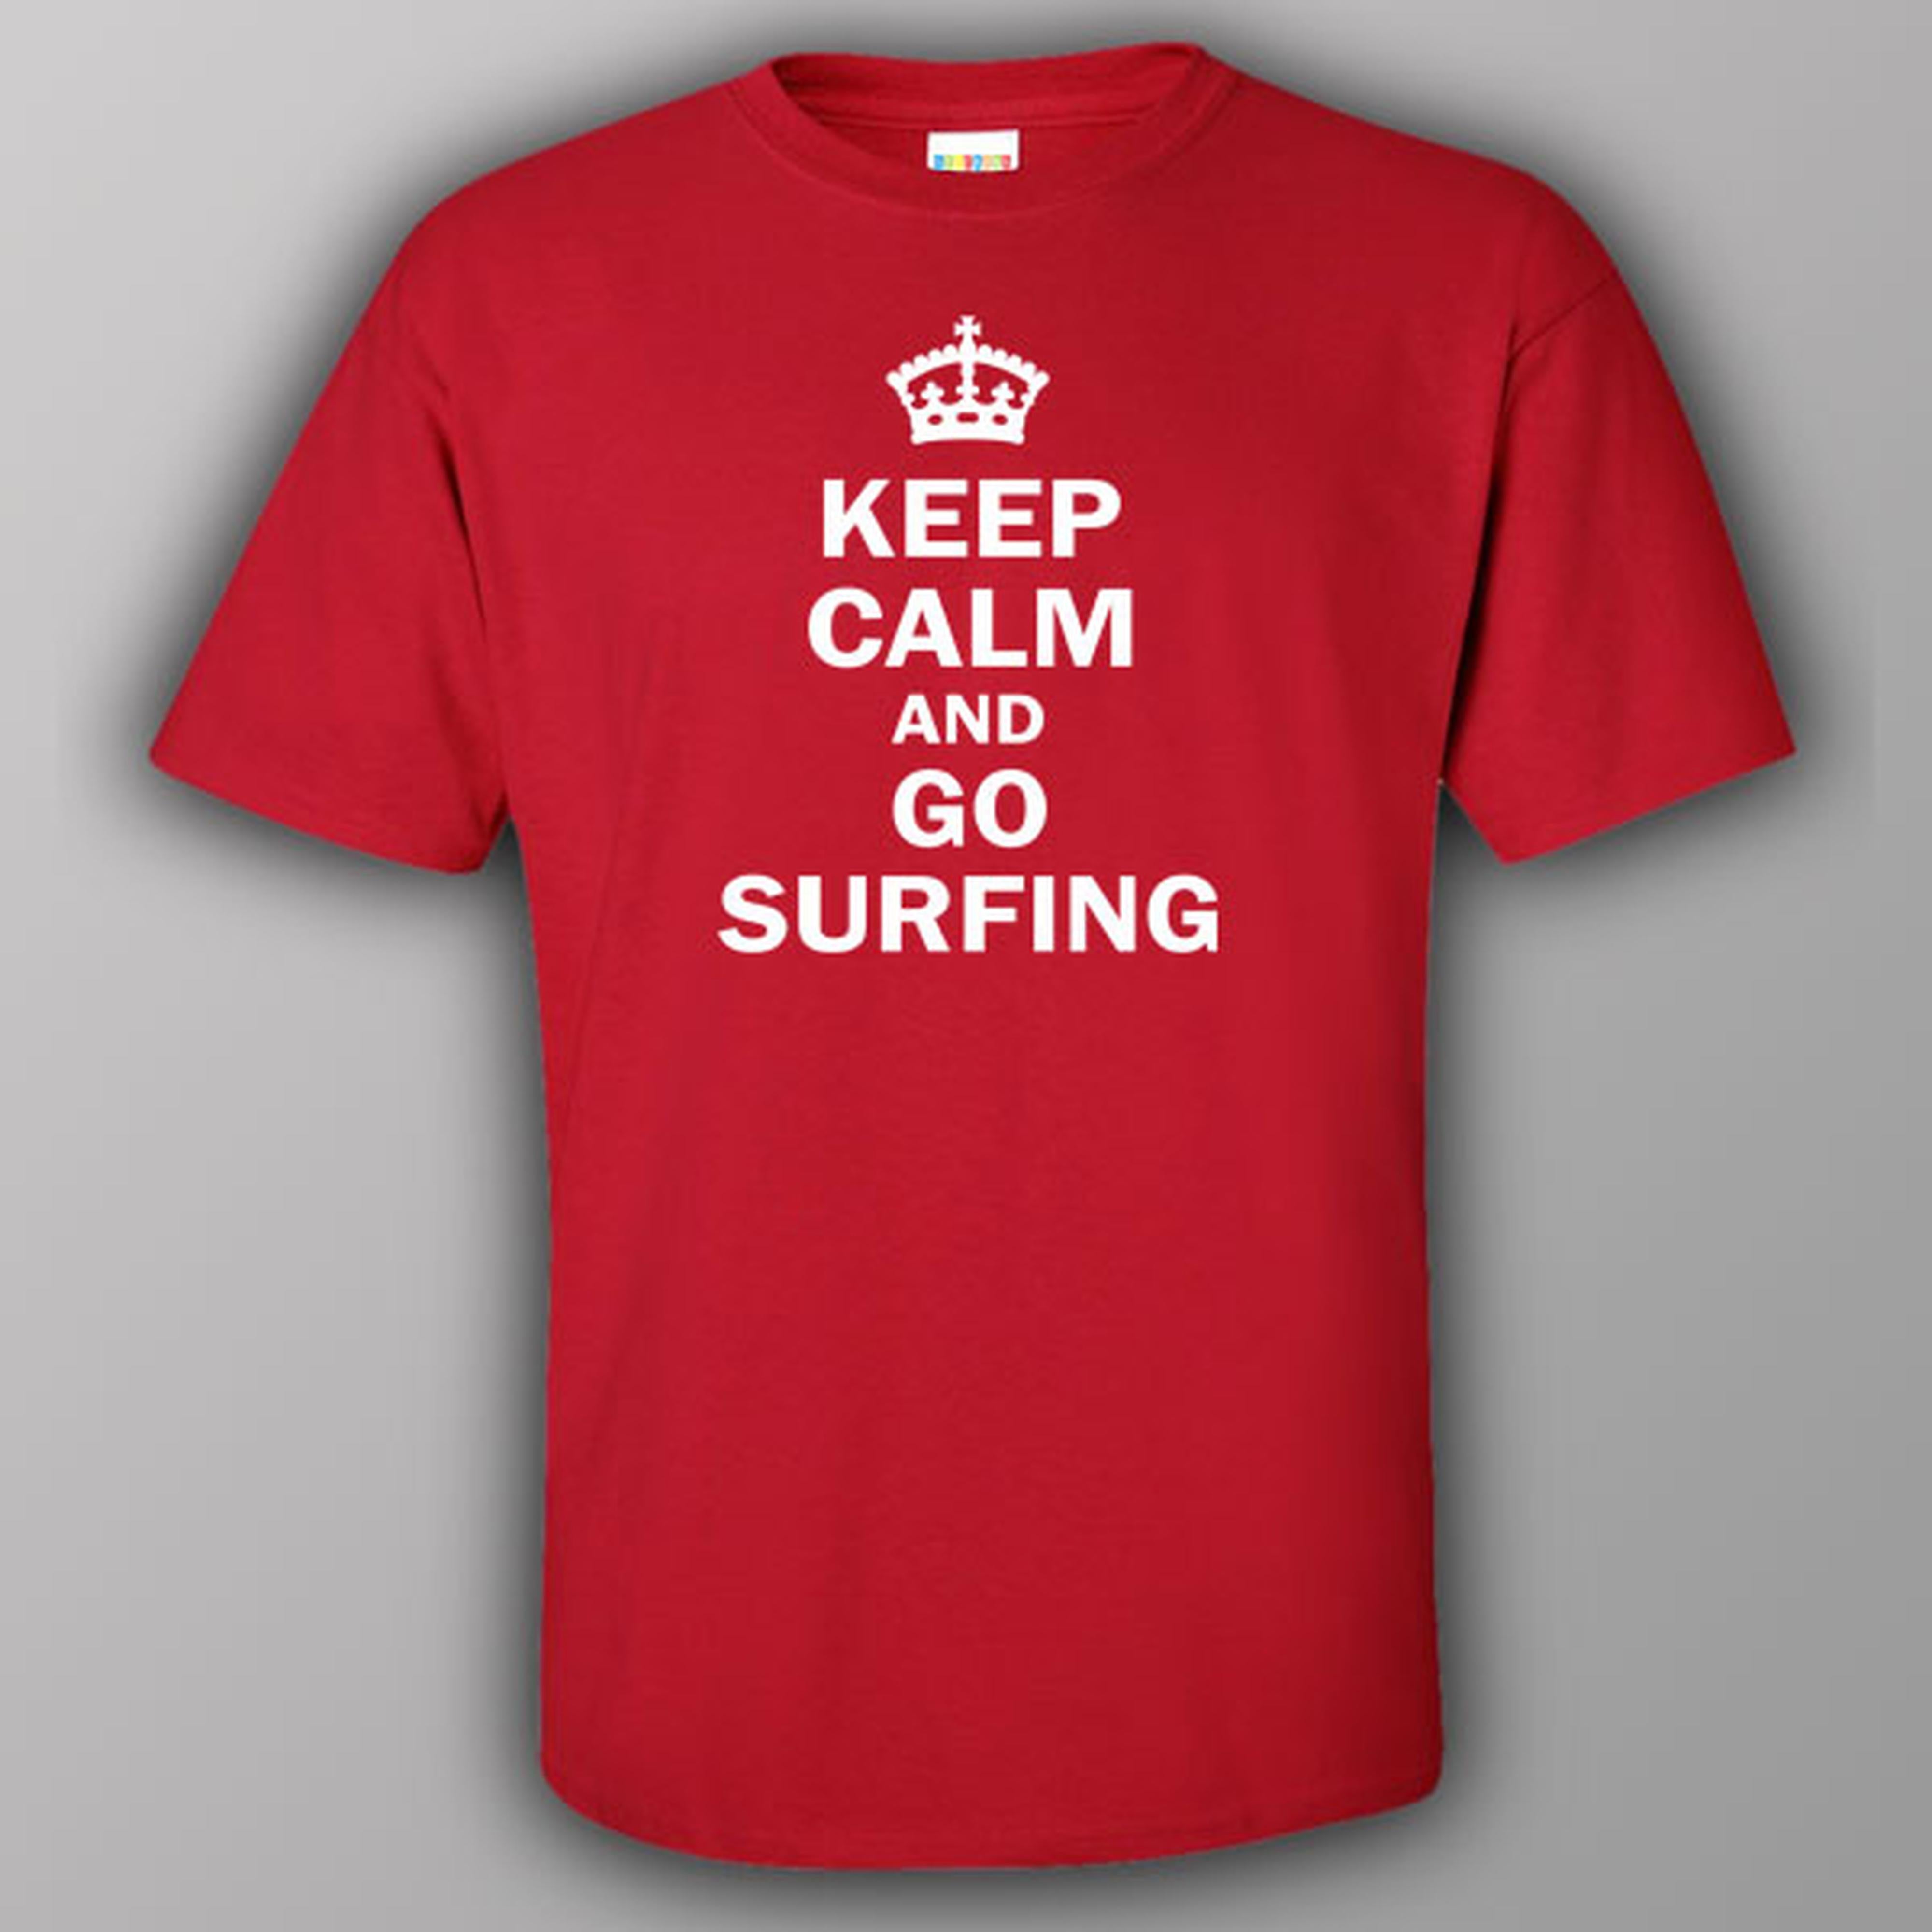 Keep calm and go surfing - T-shirt